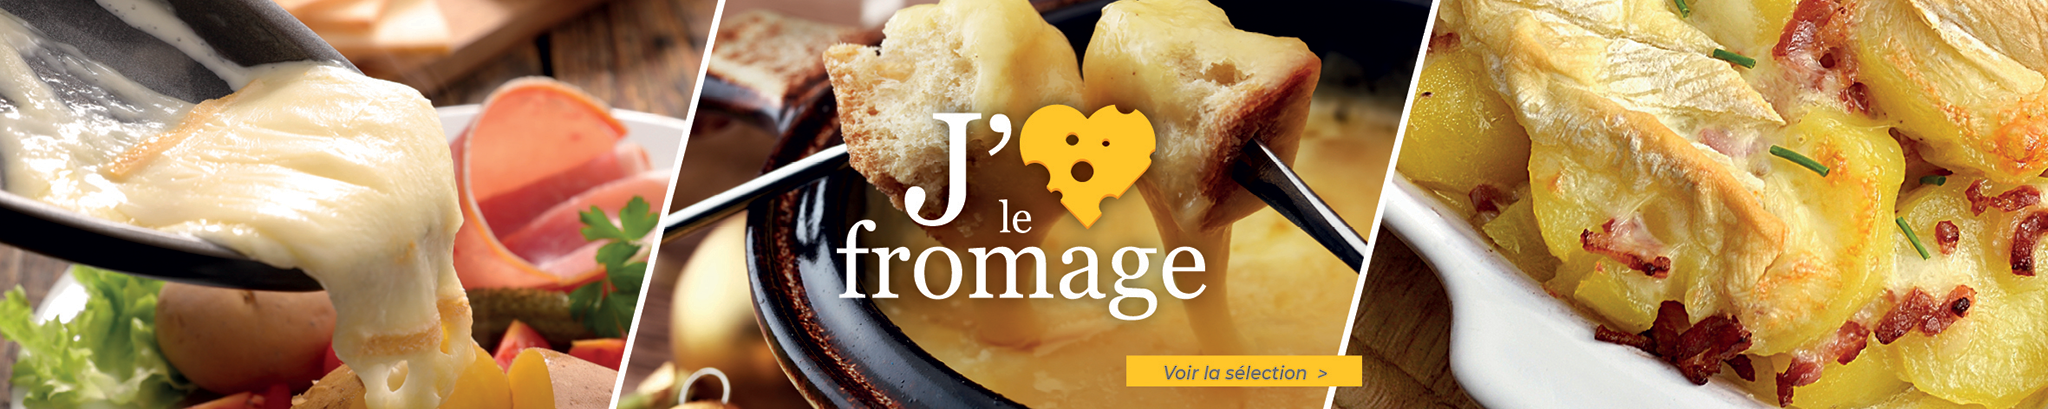 J'aime le Fromage